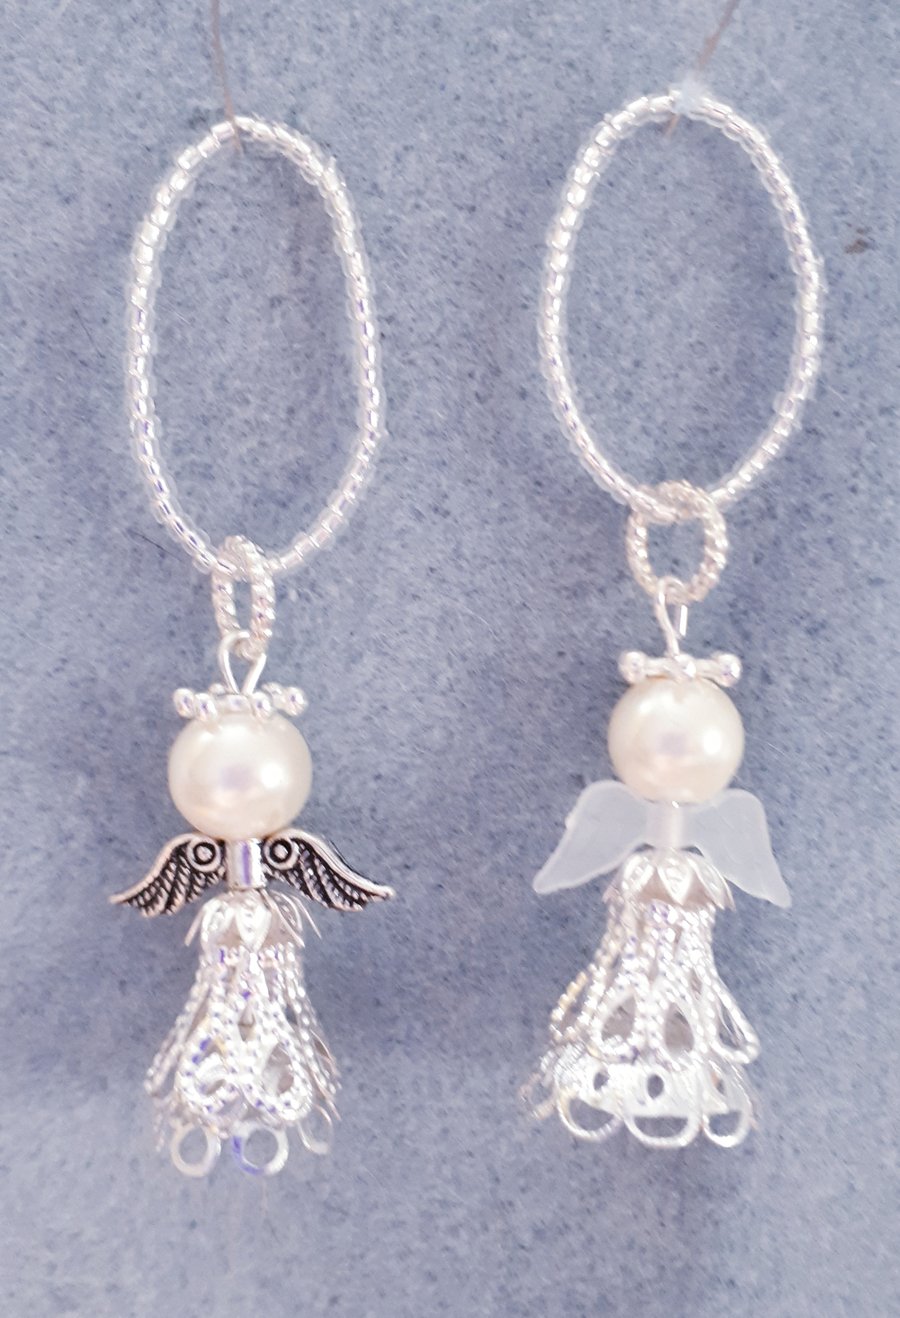 Pair of Small Hanging Angels 